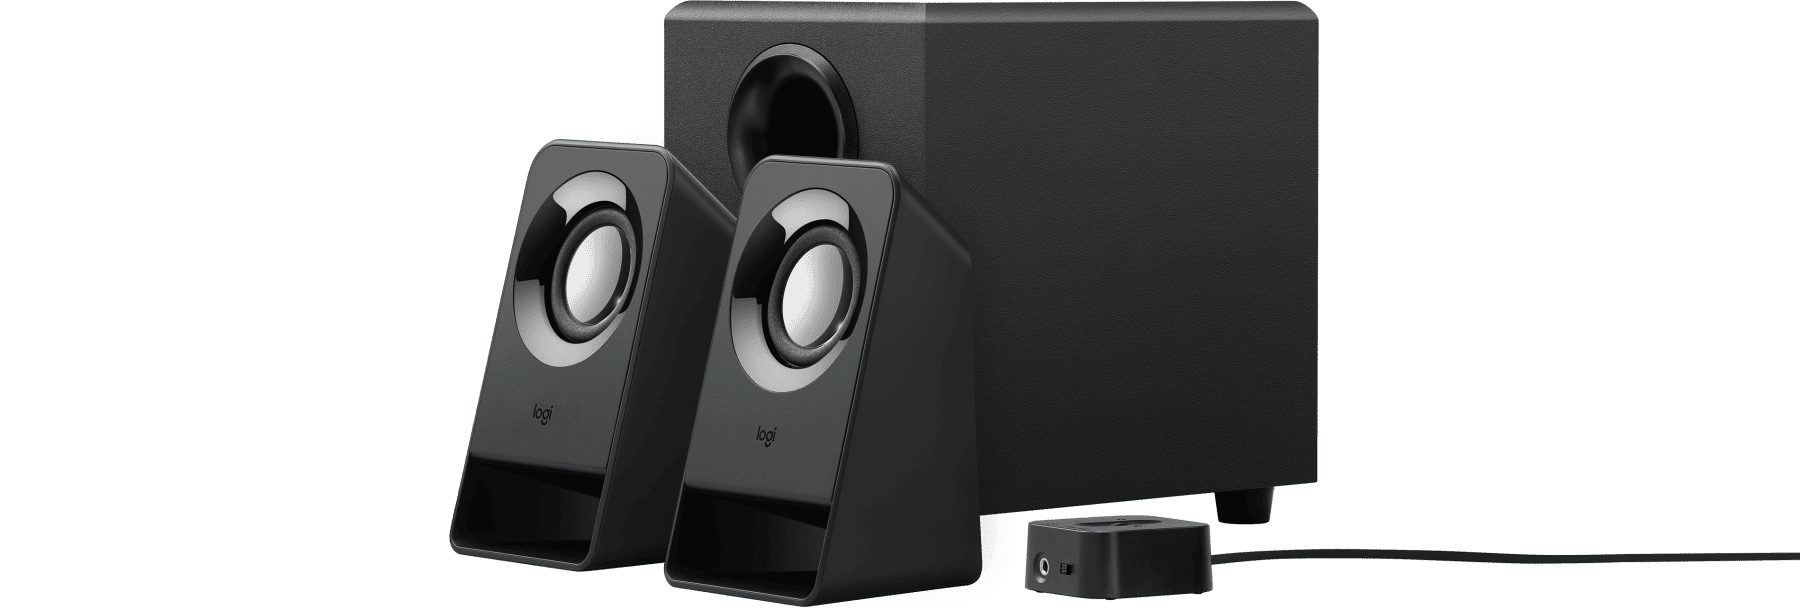 compact stereo speaker system with control pod